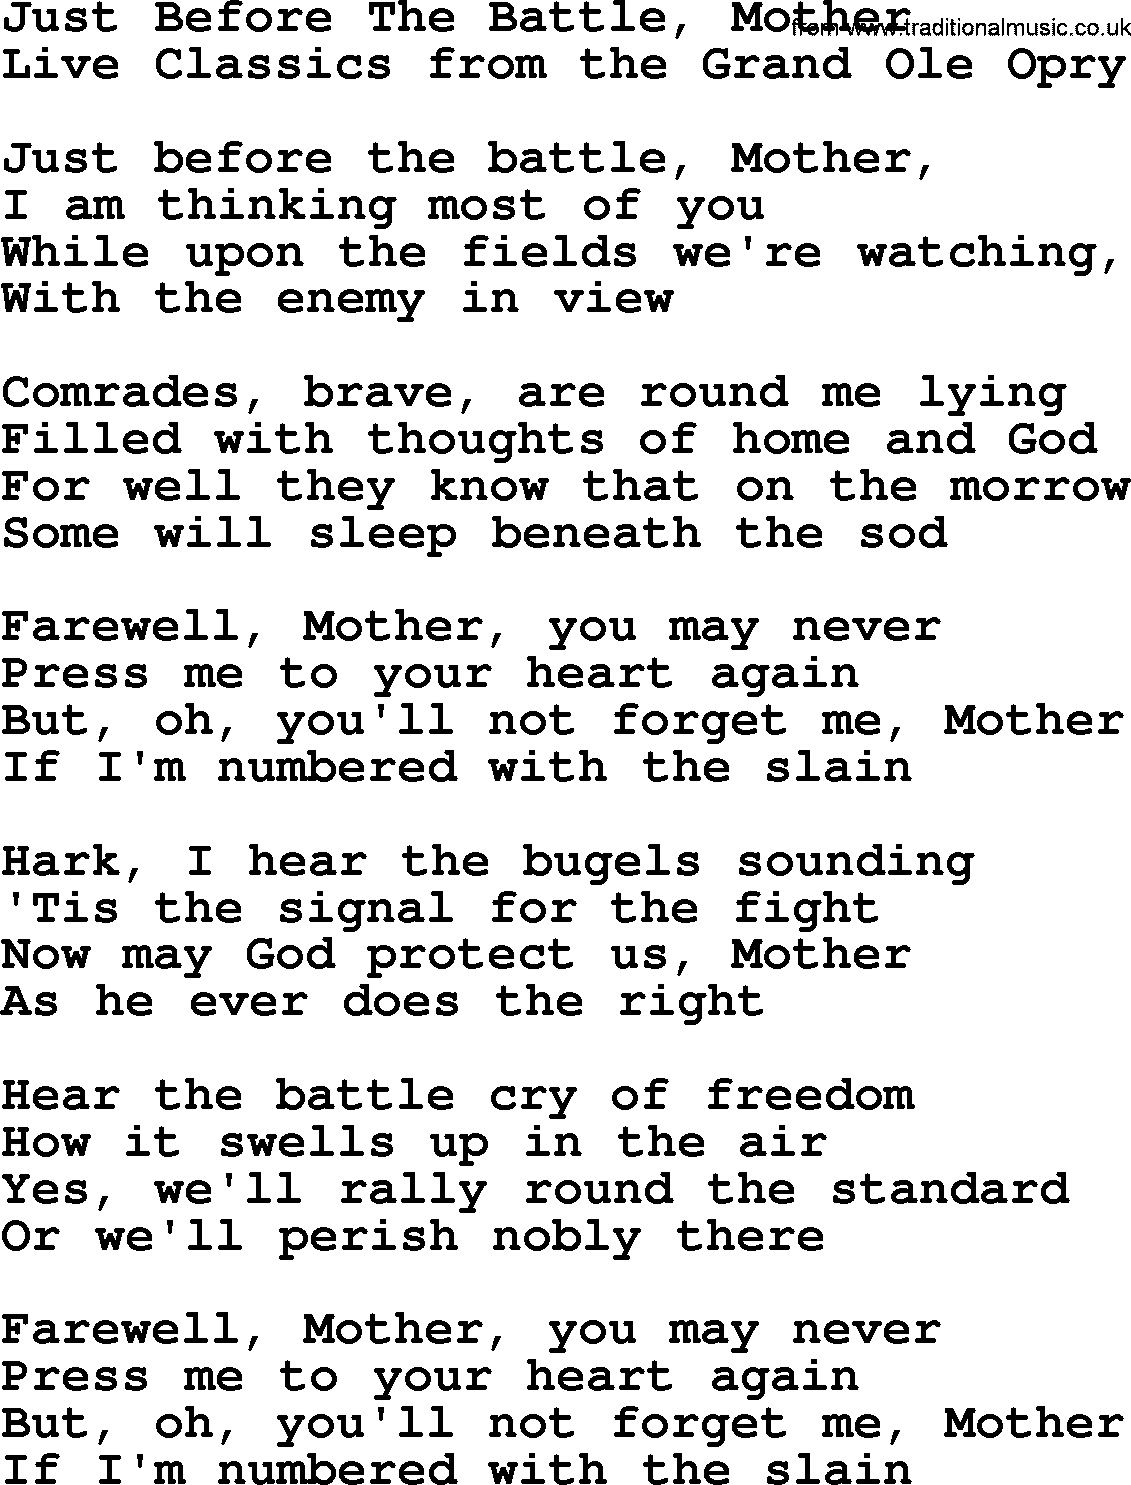 Marty Robbins song: Just Before The Battle Mother, lyrics